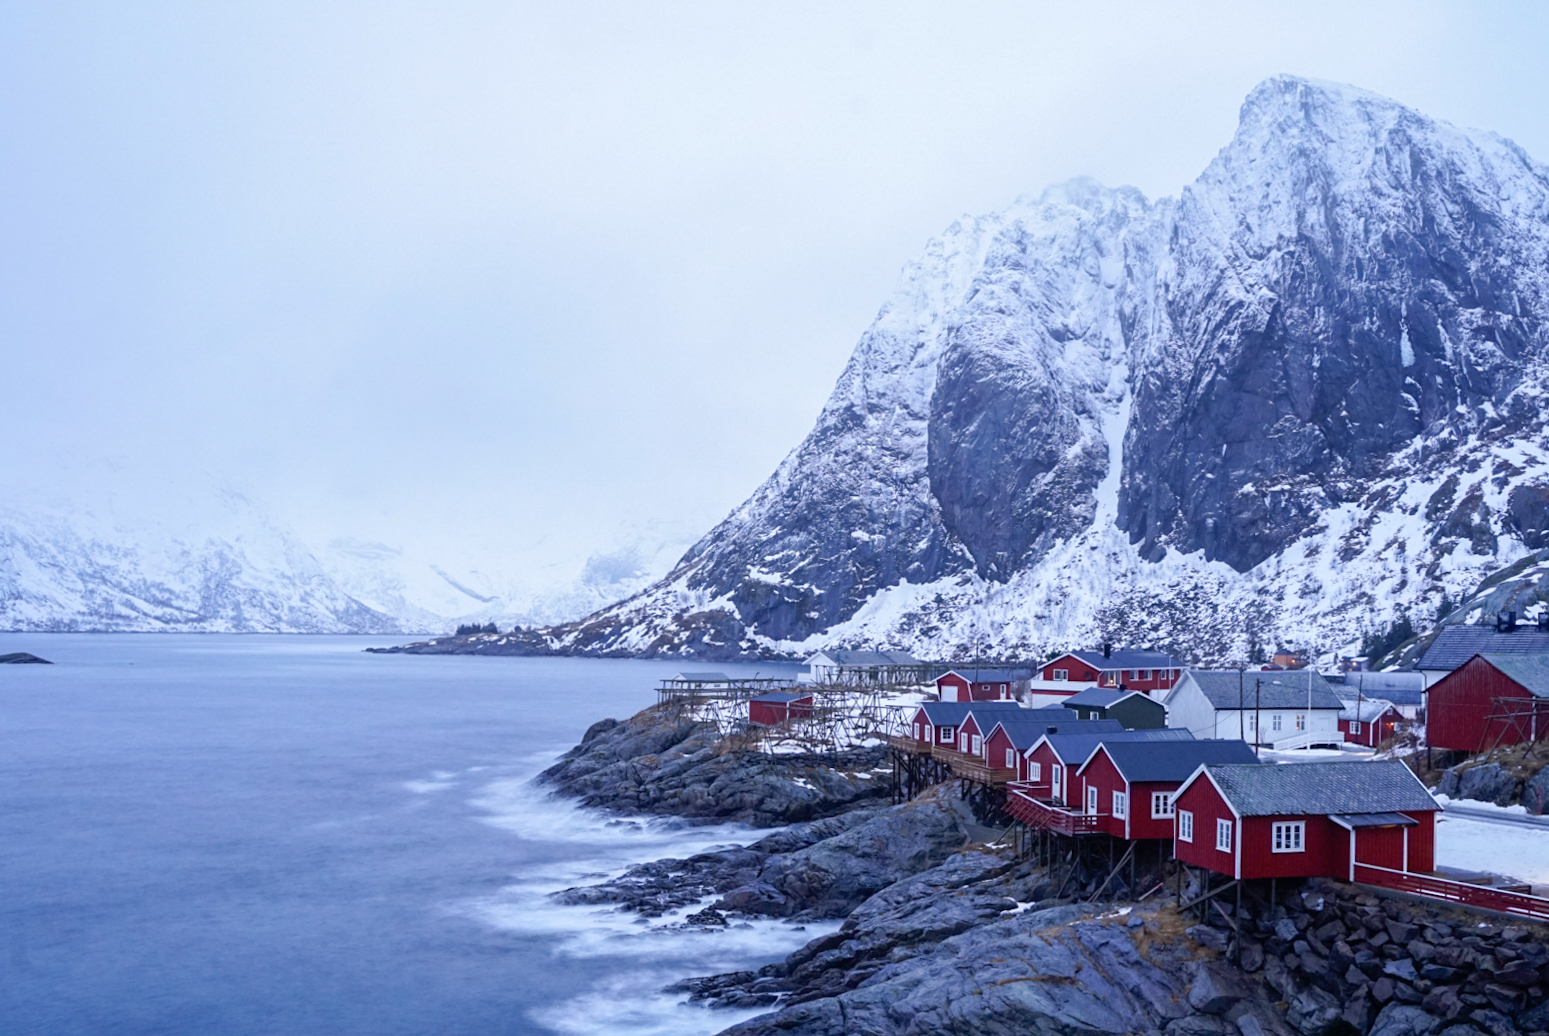 Hamnoy after the storm...